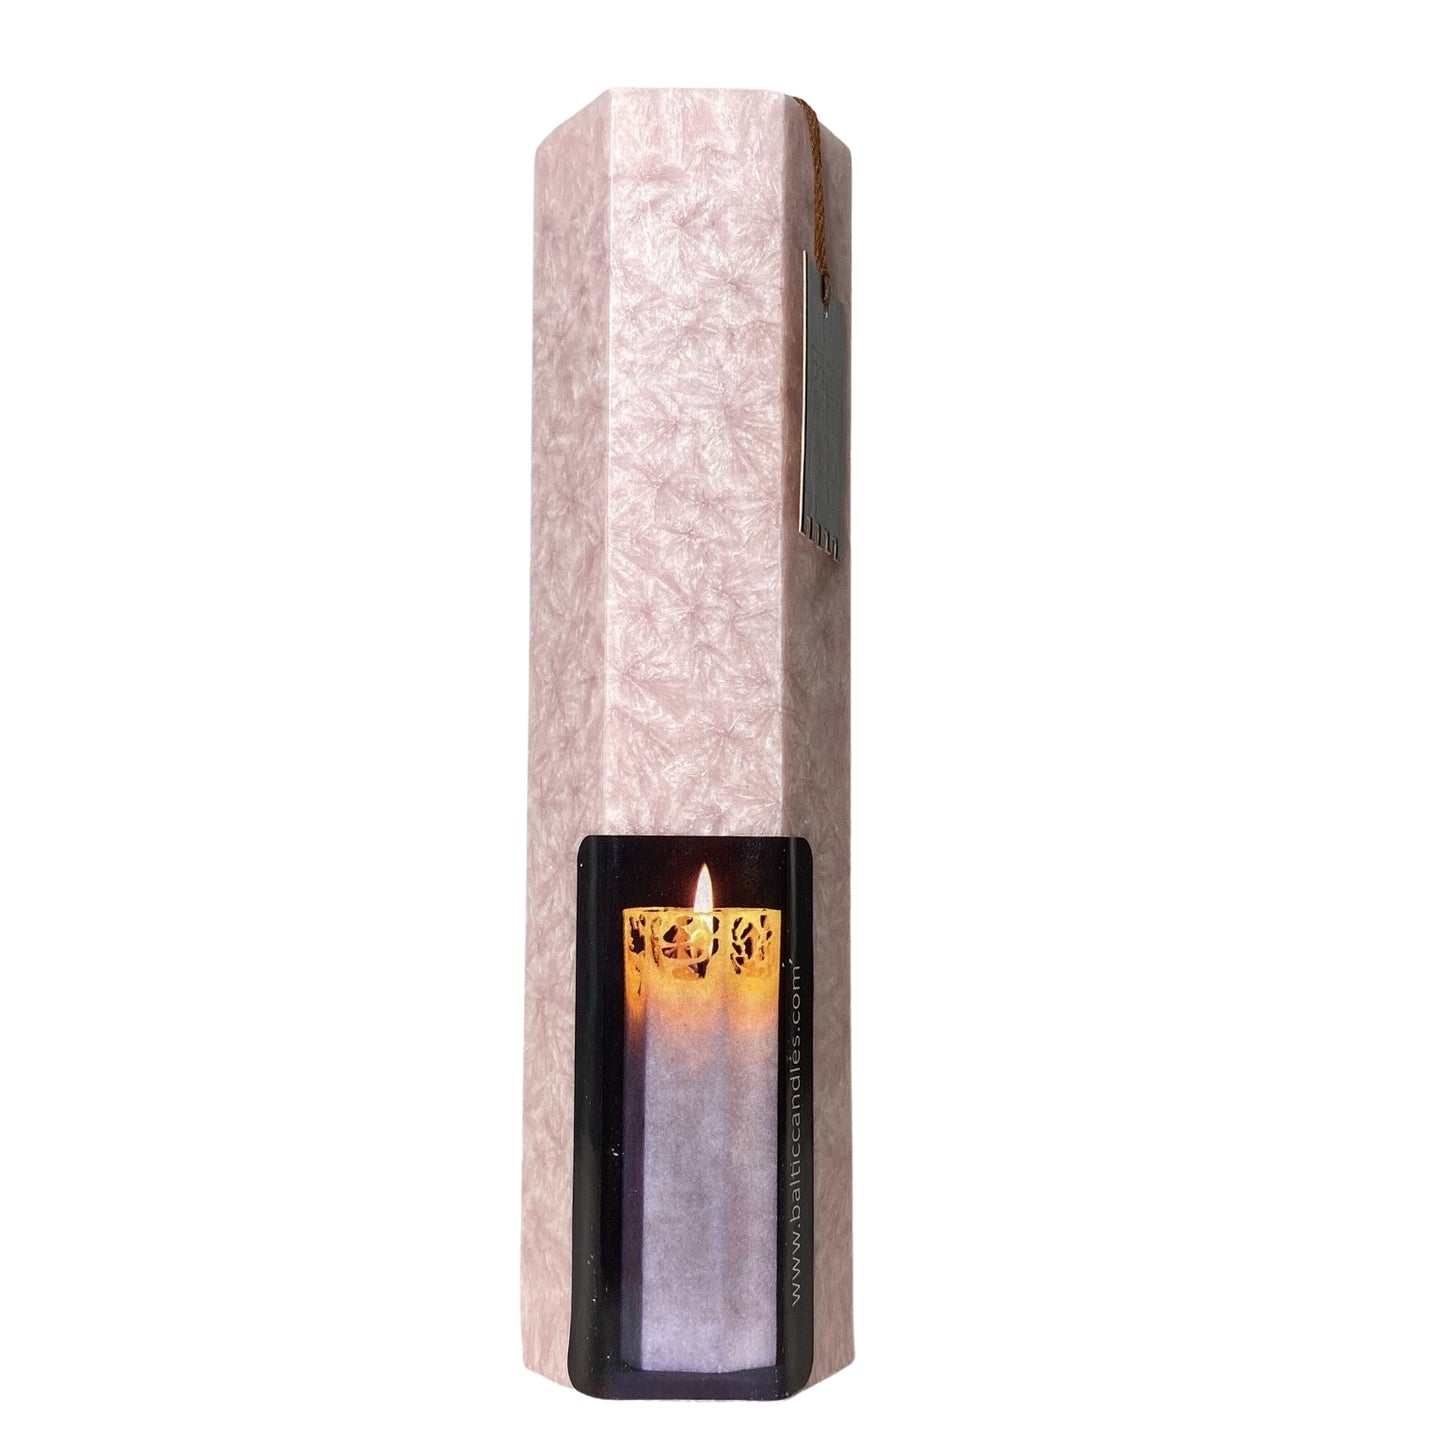 Crystal stearin lace candle H20 cm, light pink